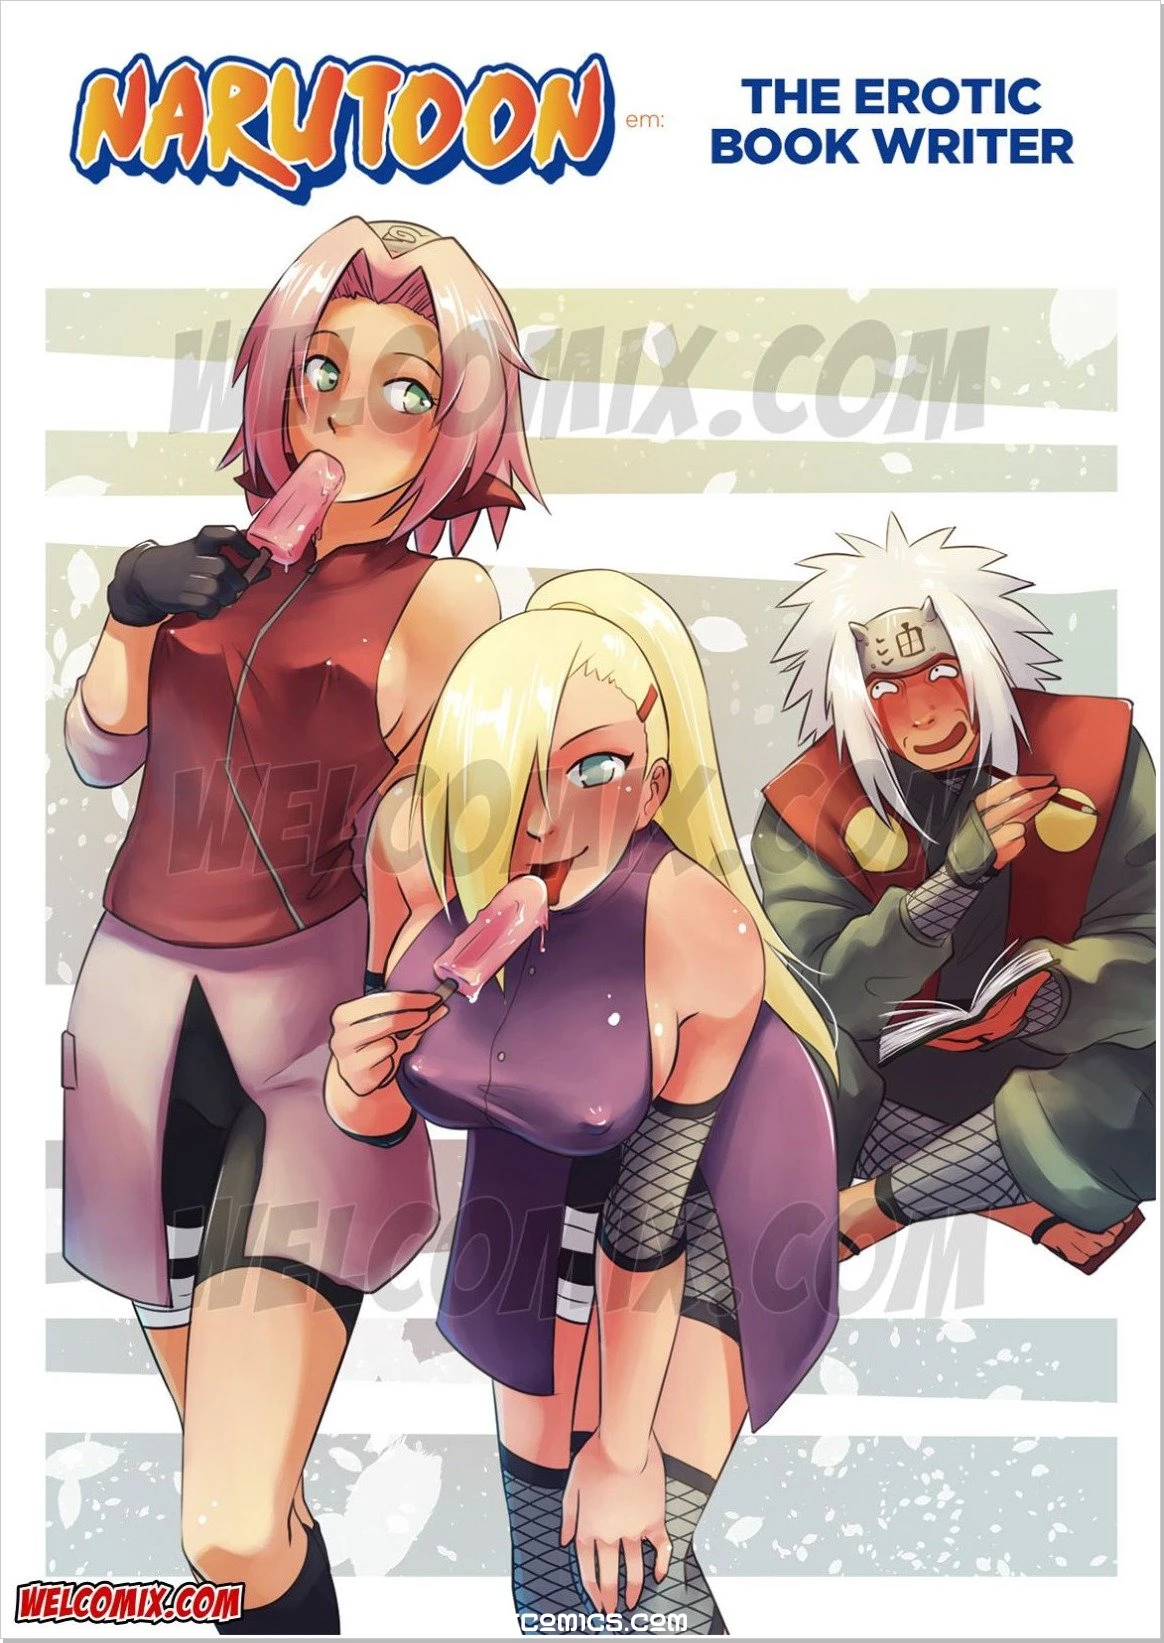 Get Your Fix of Erotic Narutoon Adventures with These Steamy Comics!